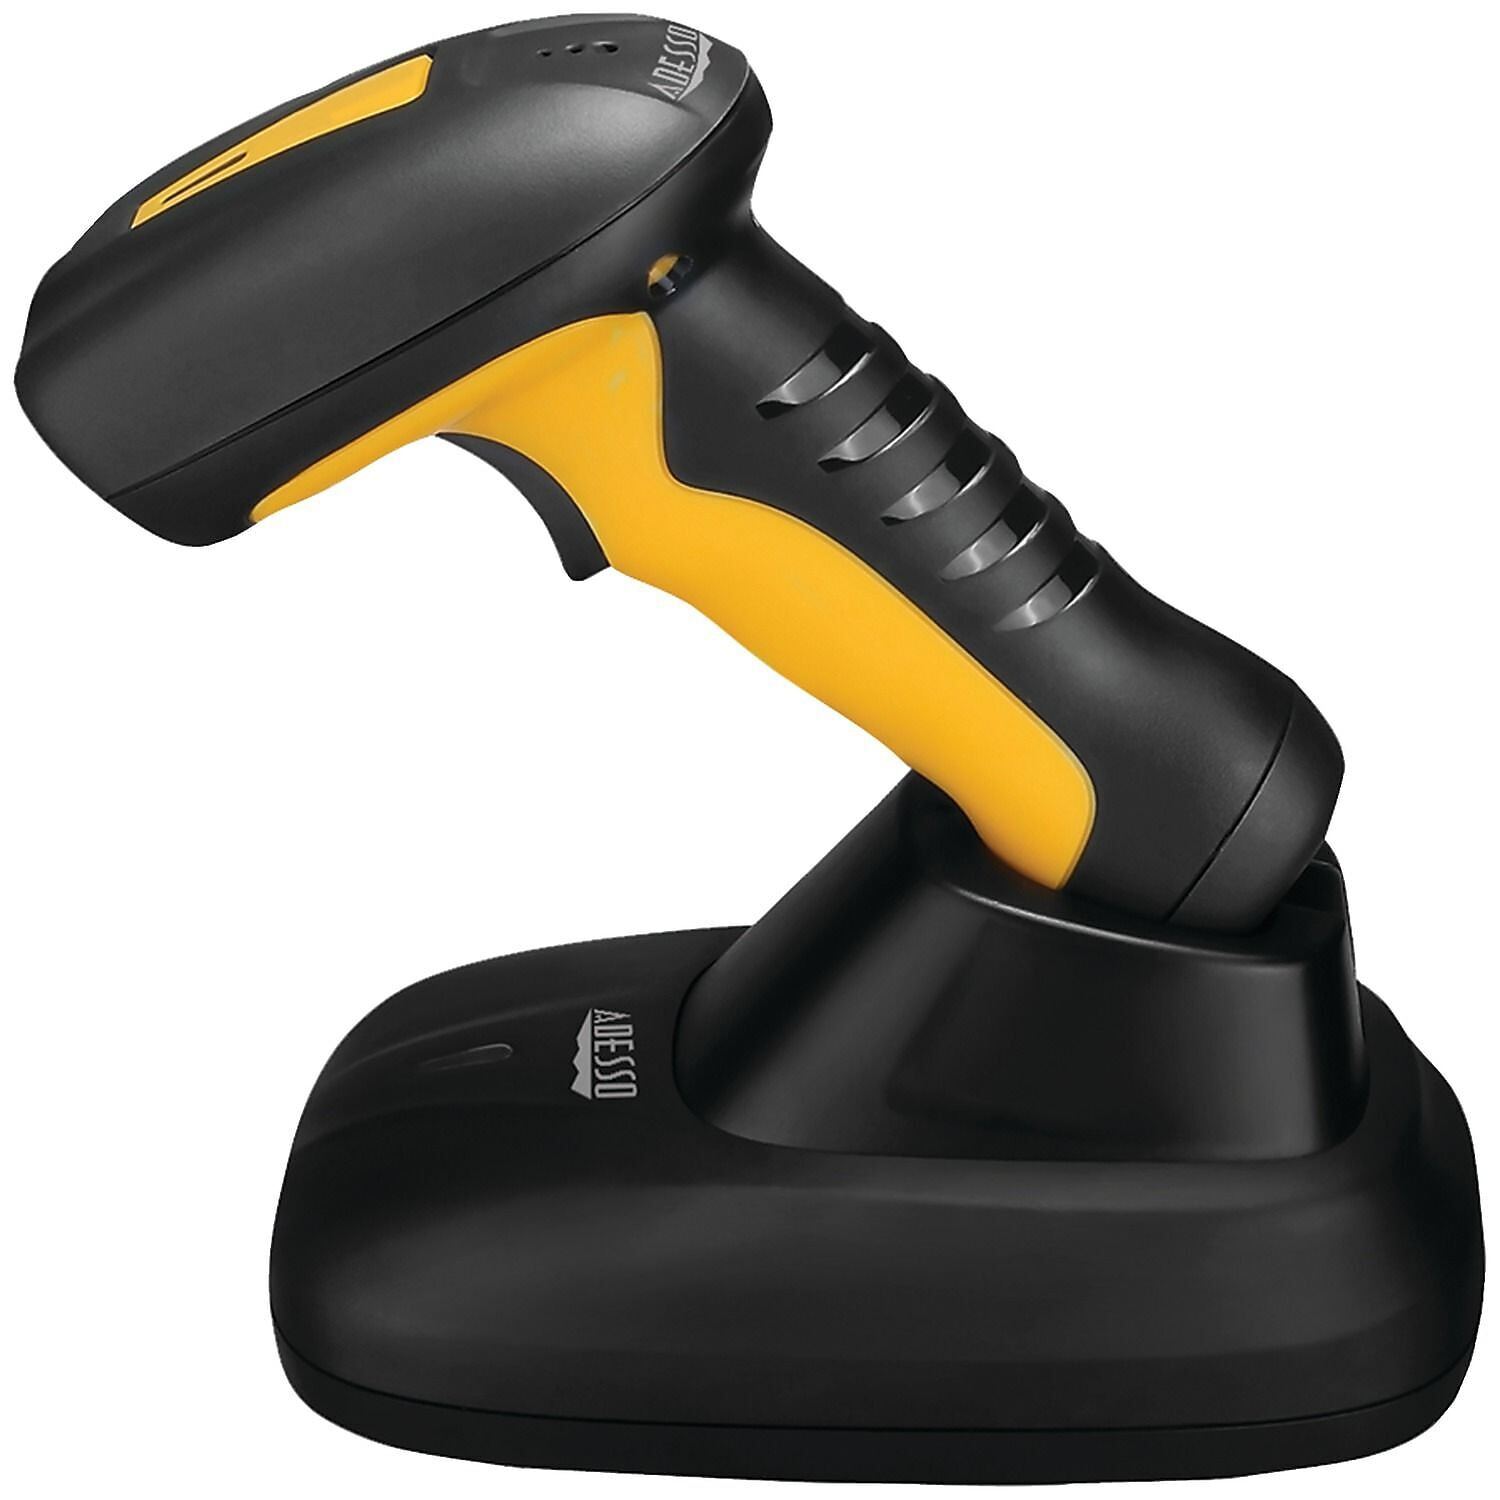 Adesso Bluetooth CCD 1D Handheld Barcode Scanner Black/Yellow NUSCAN